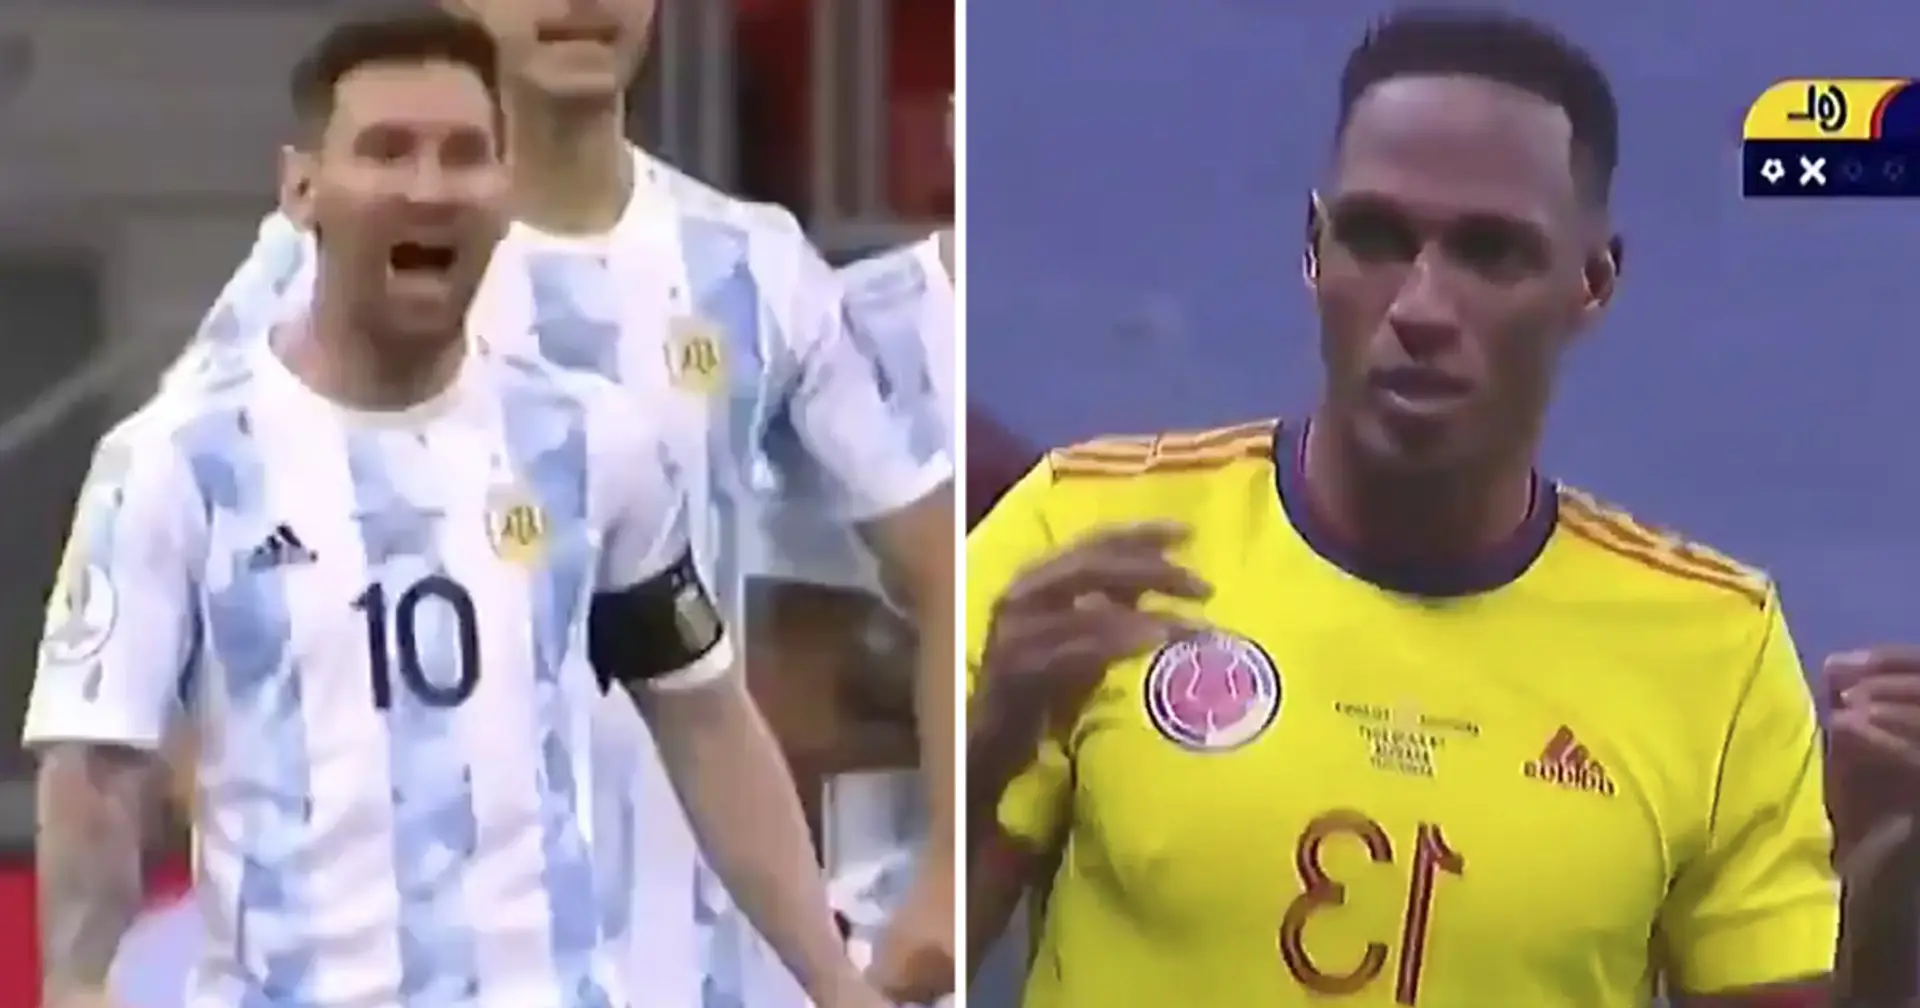 'Dance now!': Messi mocks Mina during intense shoot-out as karma haunts Colombia defender